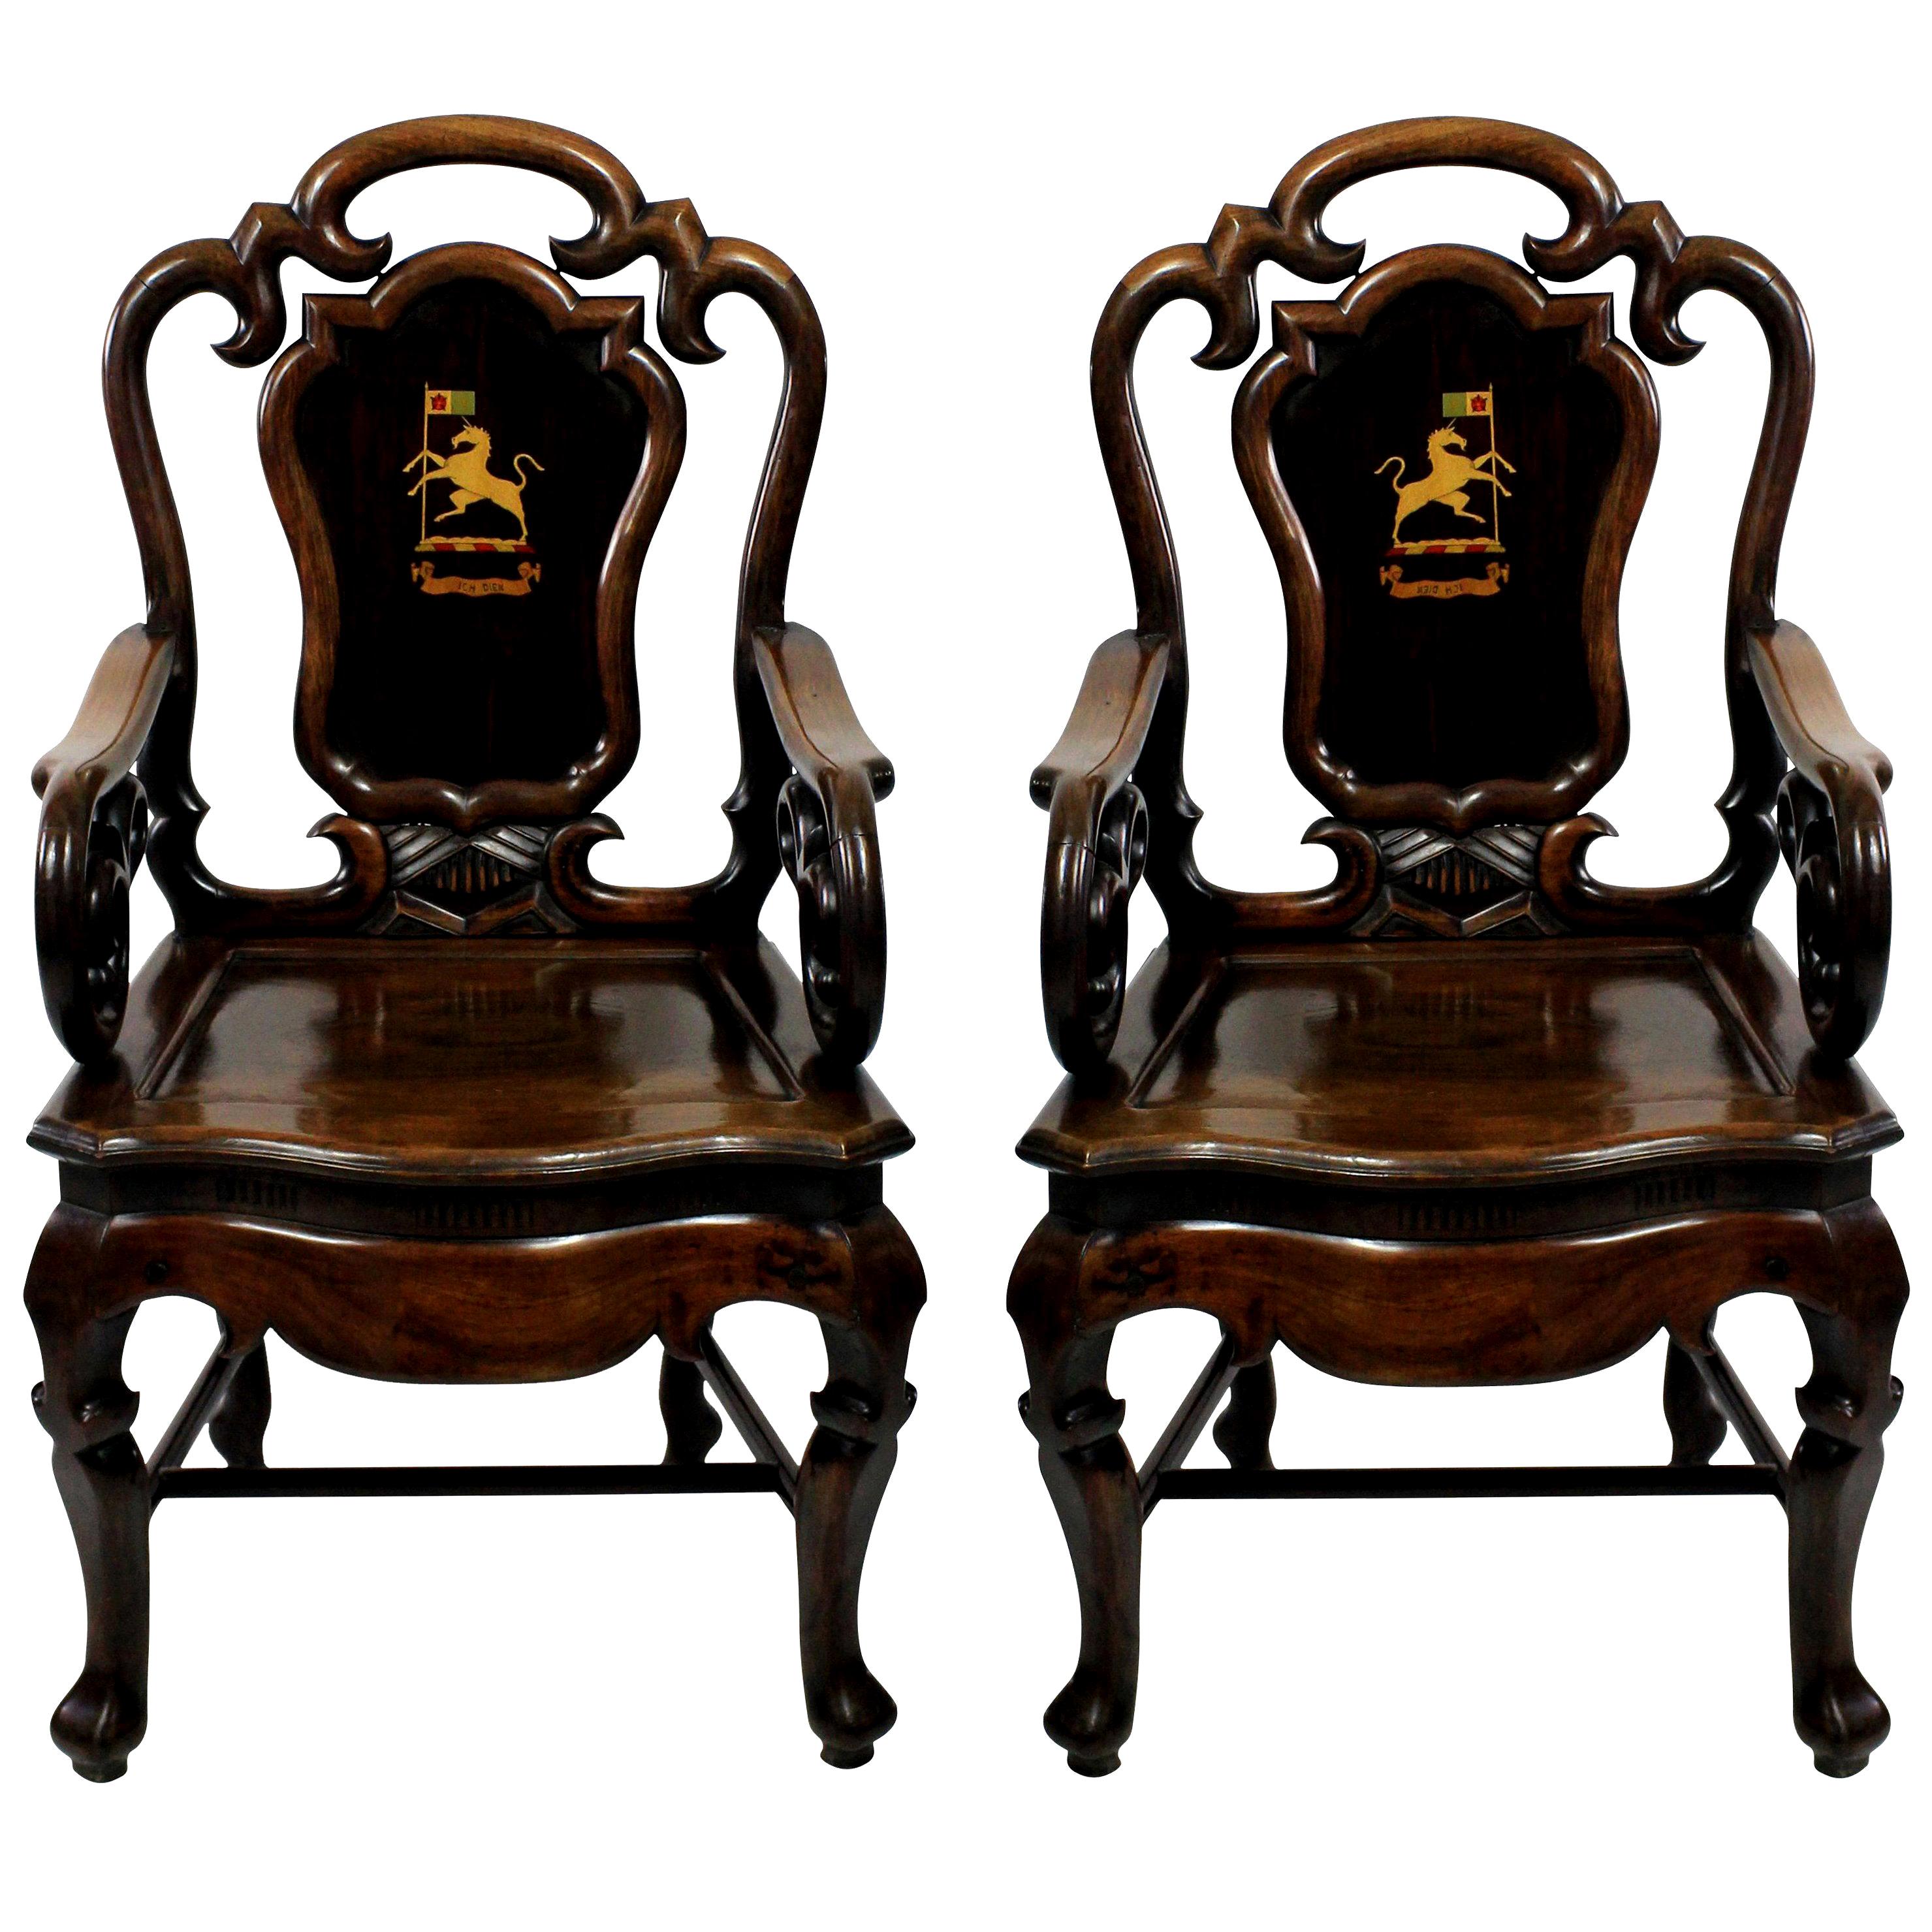 Pair of Early 19th Century Anglo-Chinese Armchairs